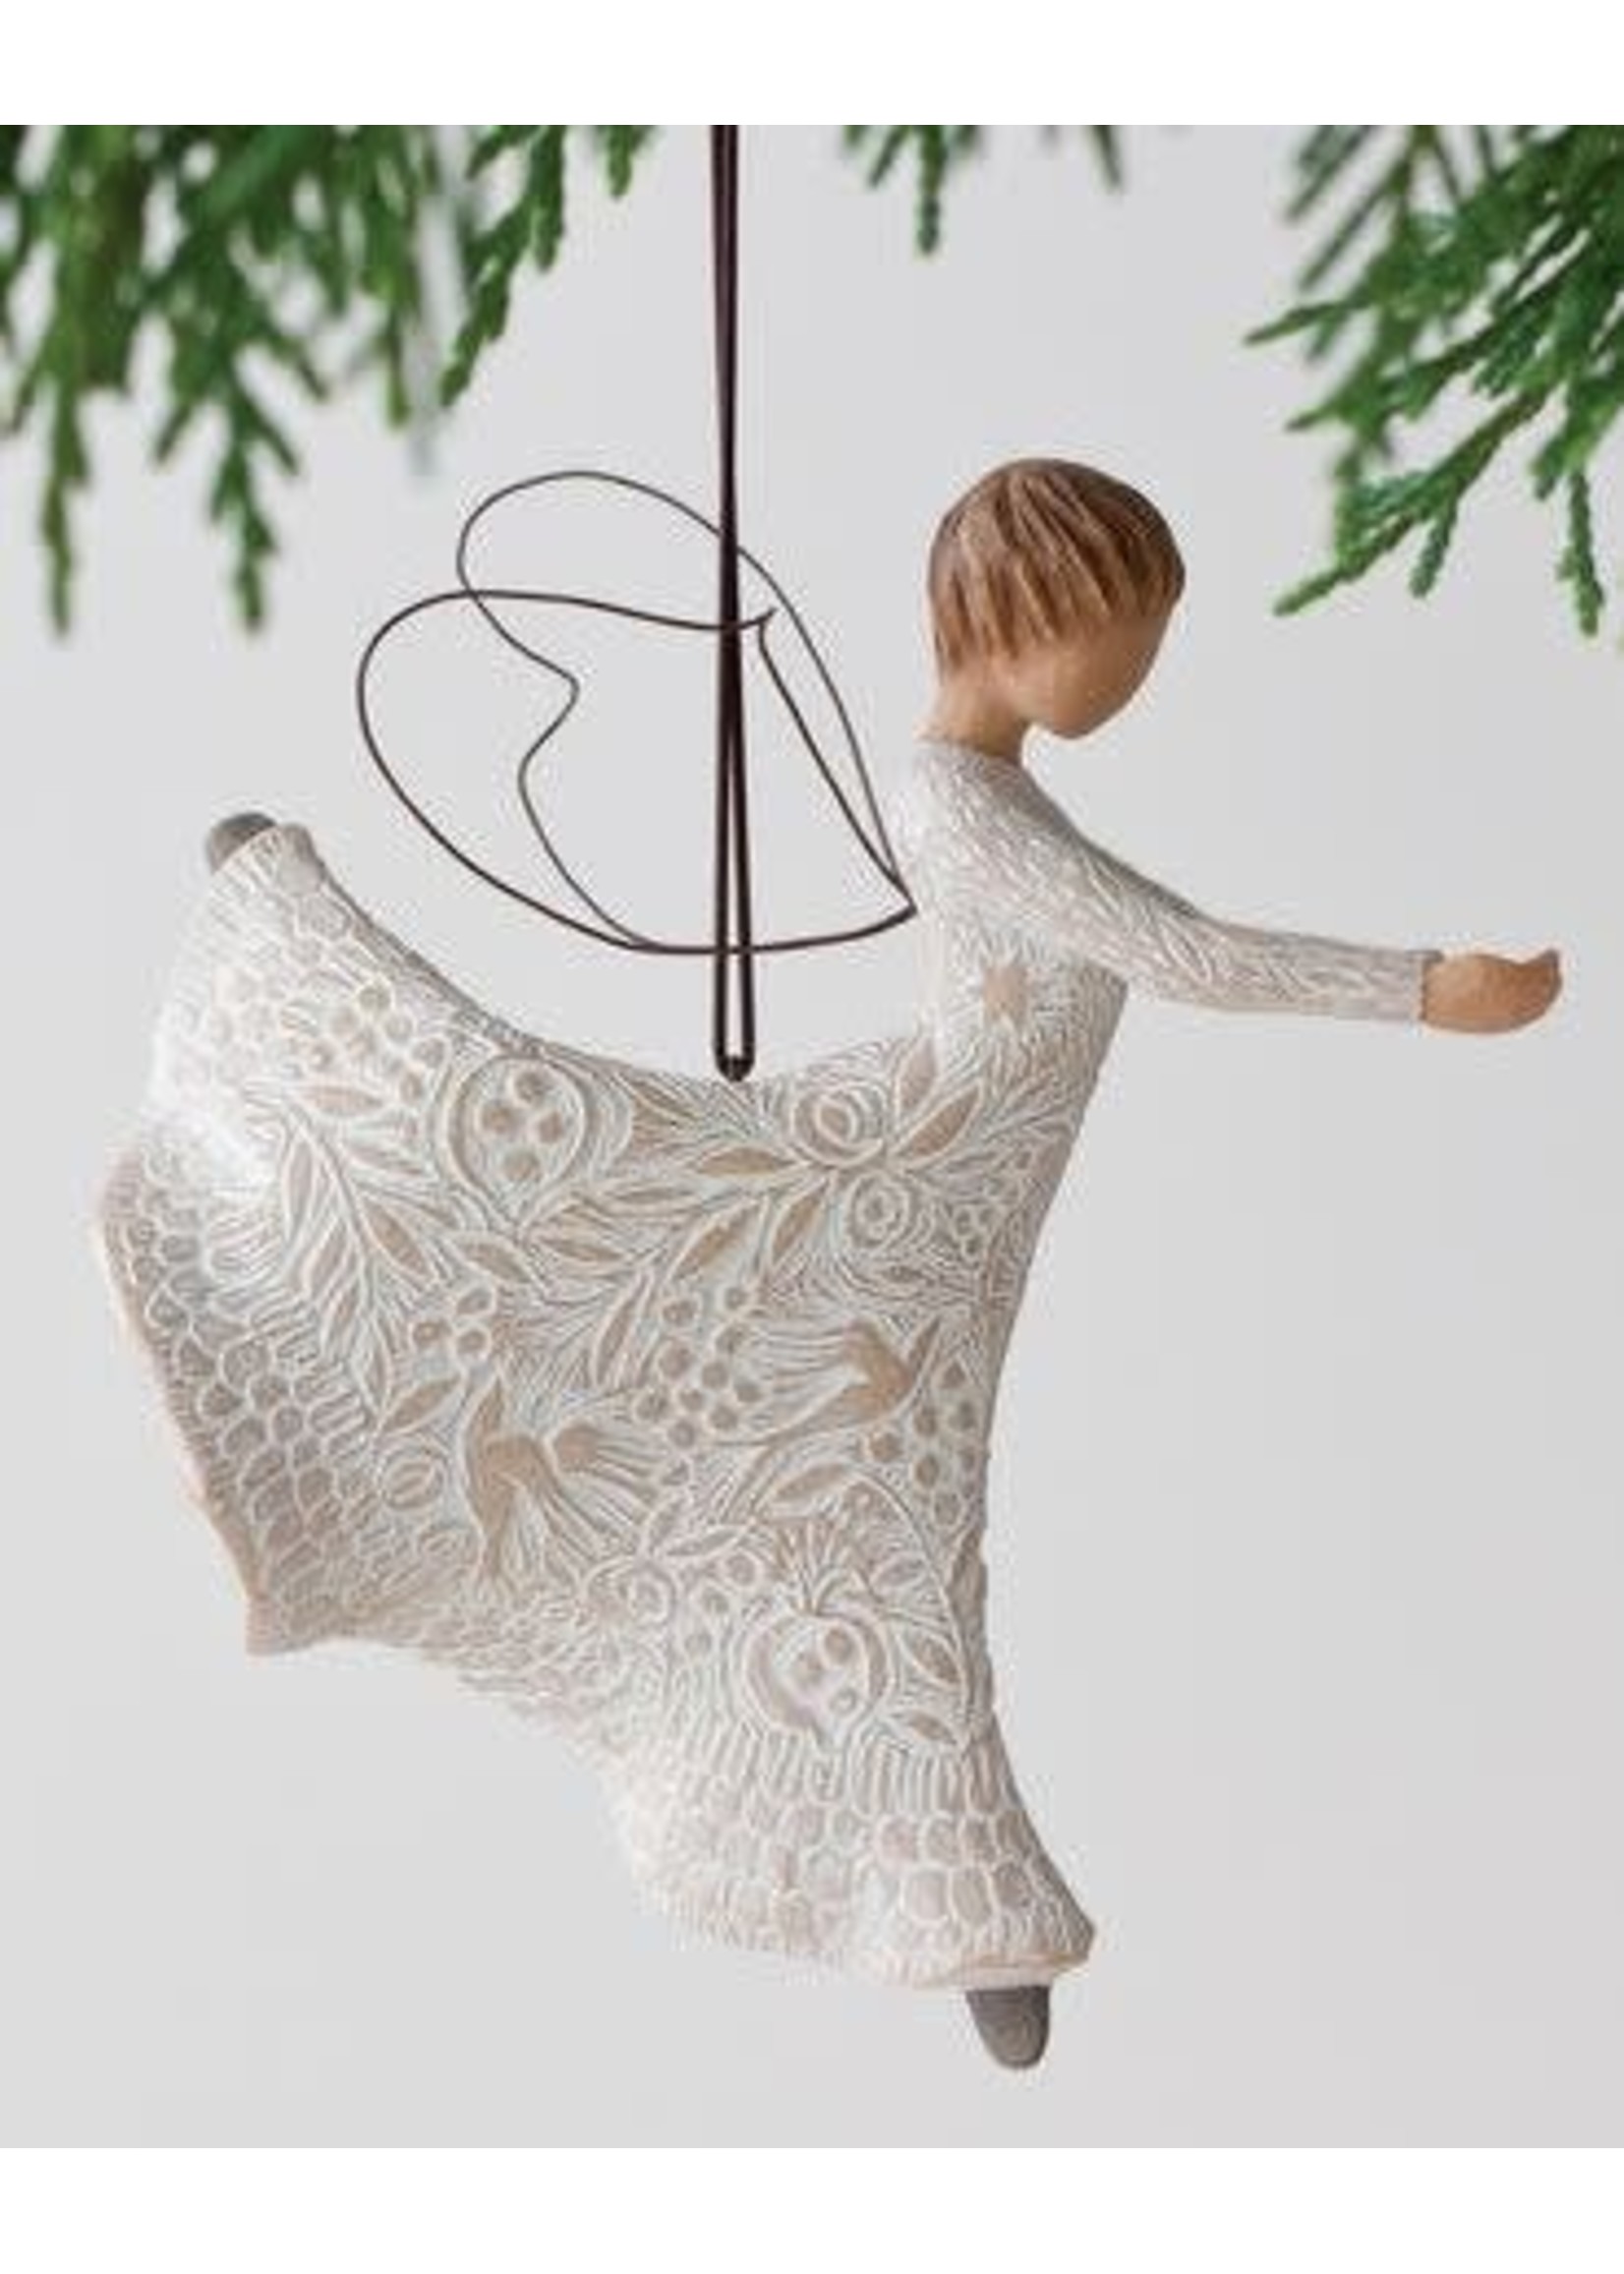 Willow Tree Dance of Life Ornament- Willow Tree